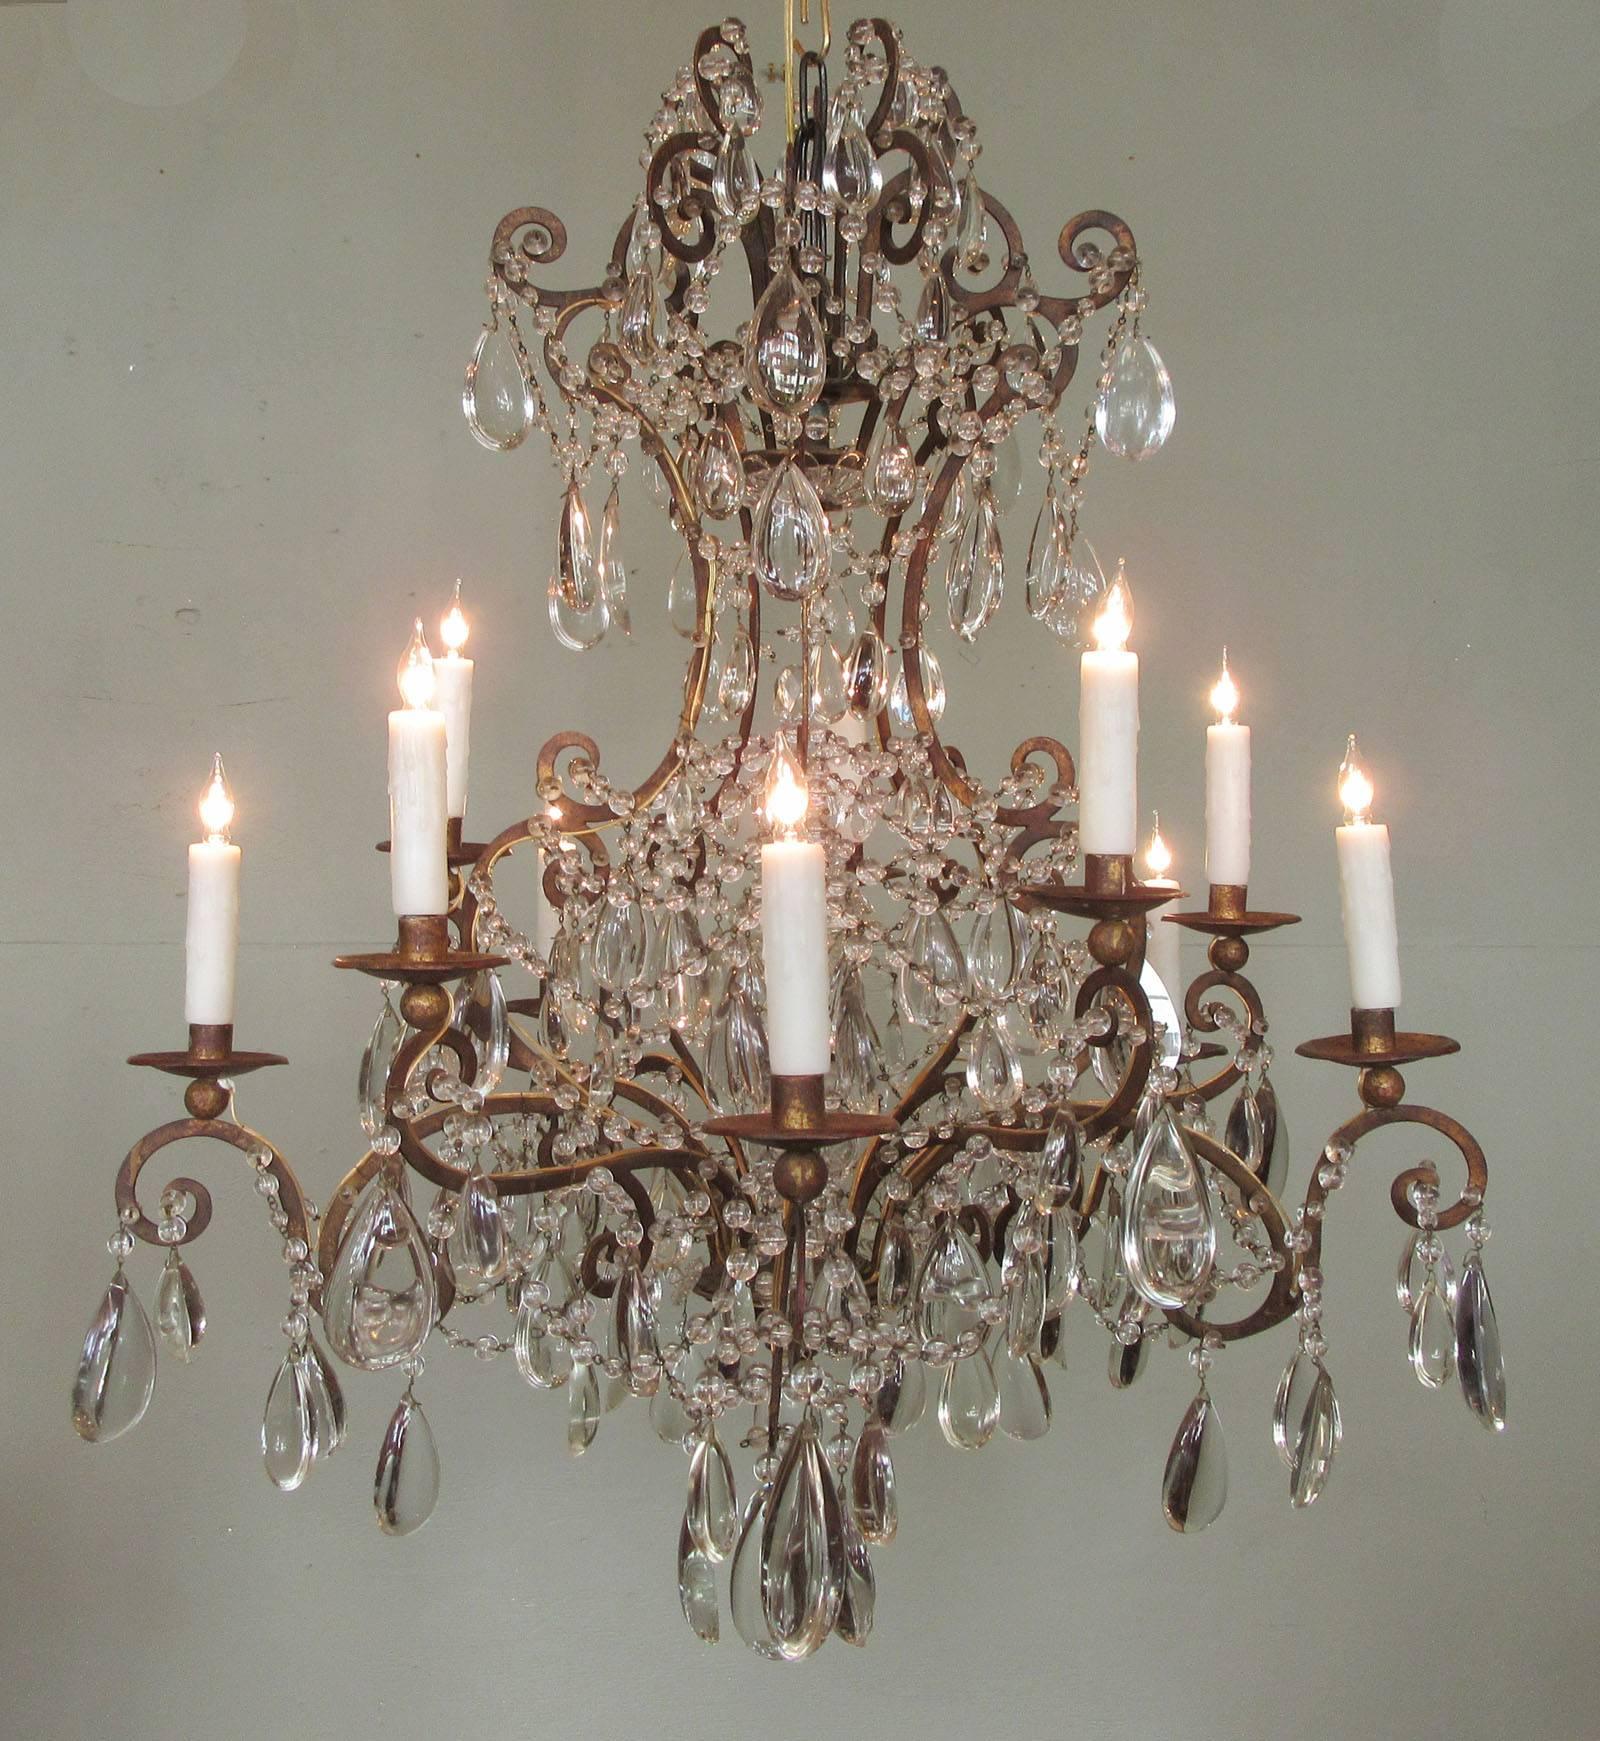 These chandeliers date to the mid-19th century, circa 1850, and were made in the Piedmont region of Italy. The fixture has ten arms and is made of tole and iron decorated with crystal prisms and swags. The chandeliers were originally candle but both